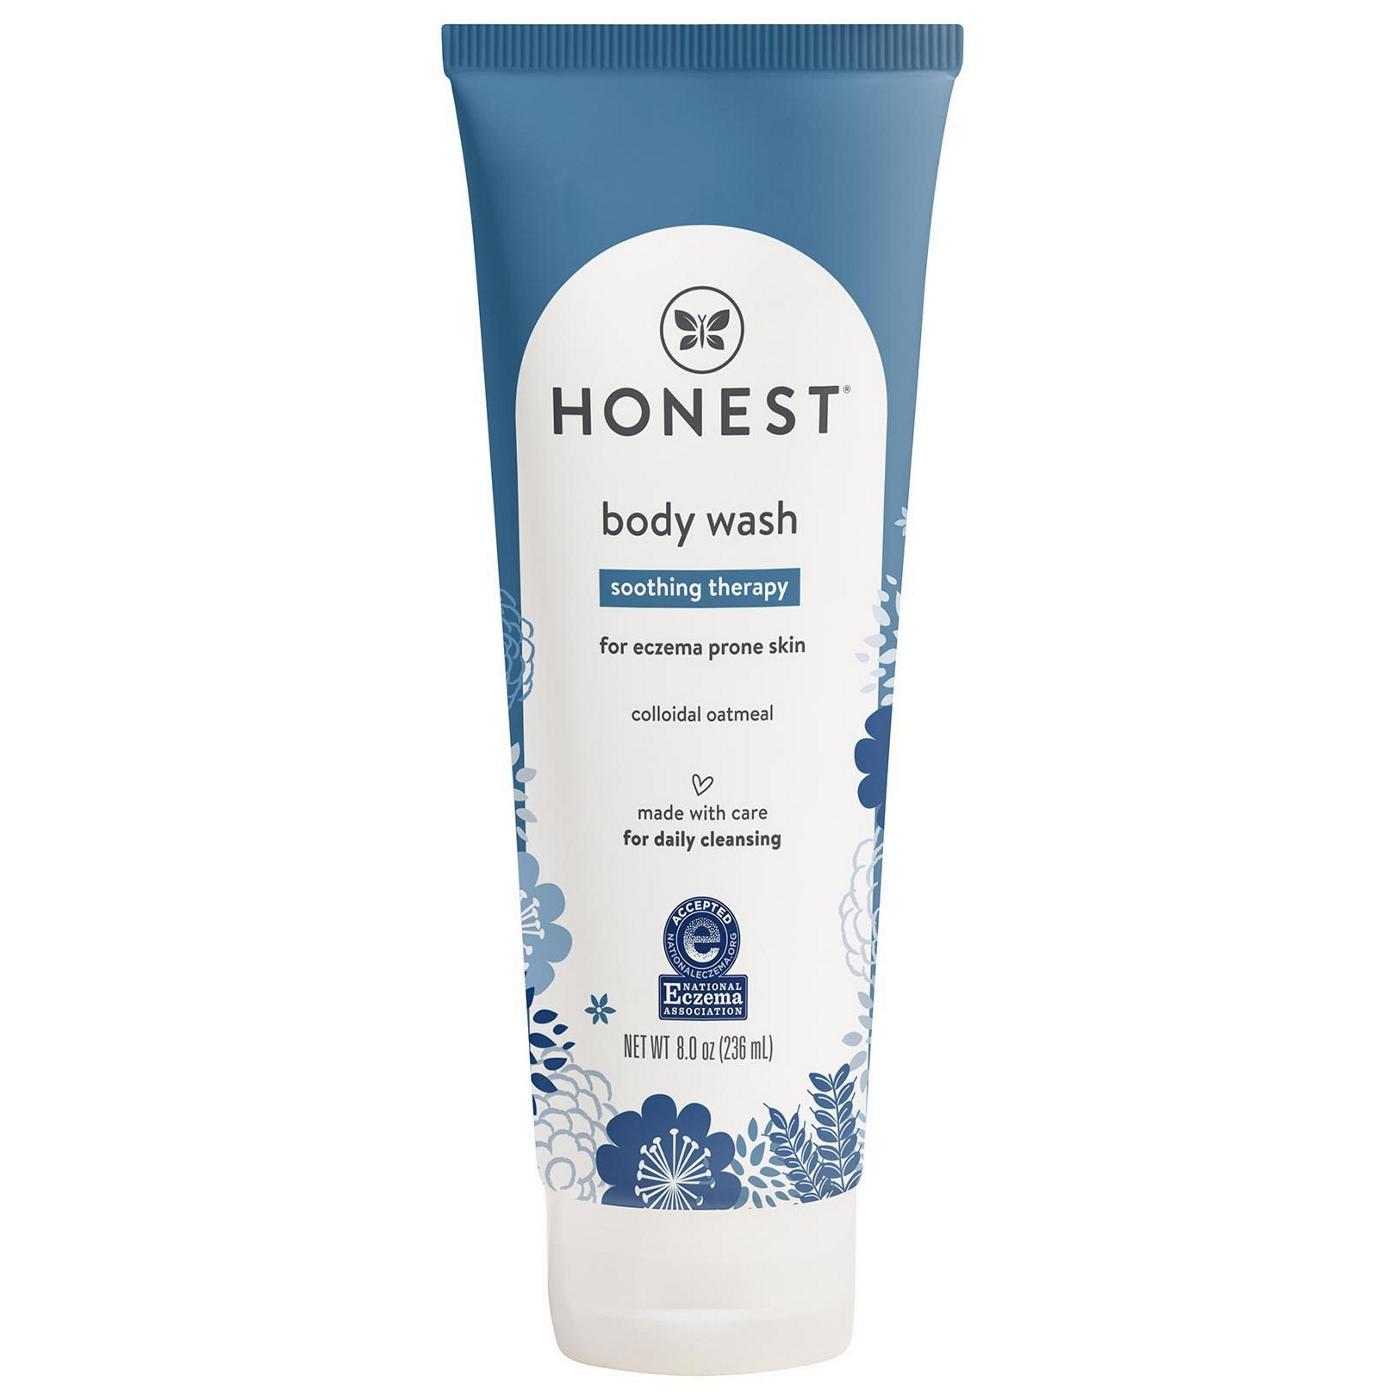 The Honest Company Exzema Soothing Therapy Body Wash; image 1 of 3